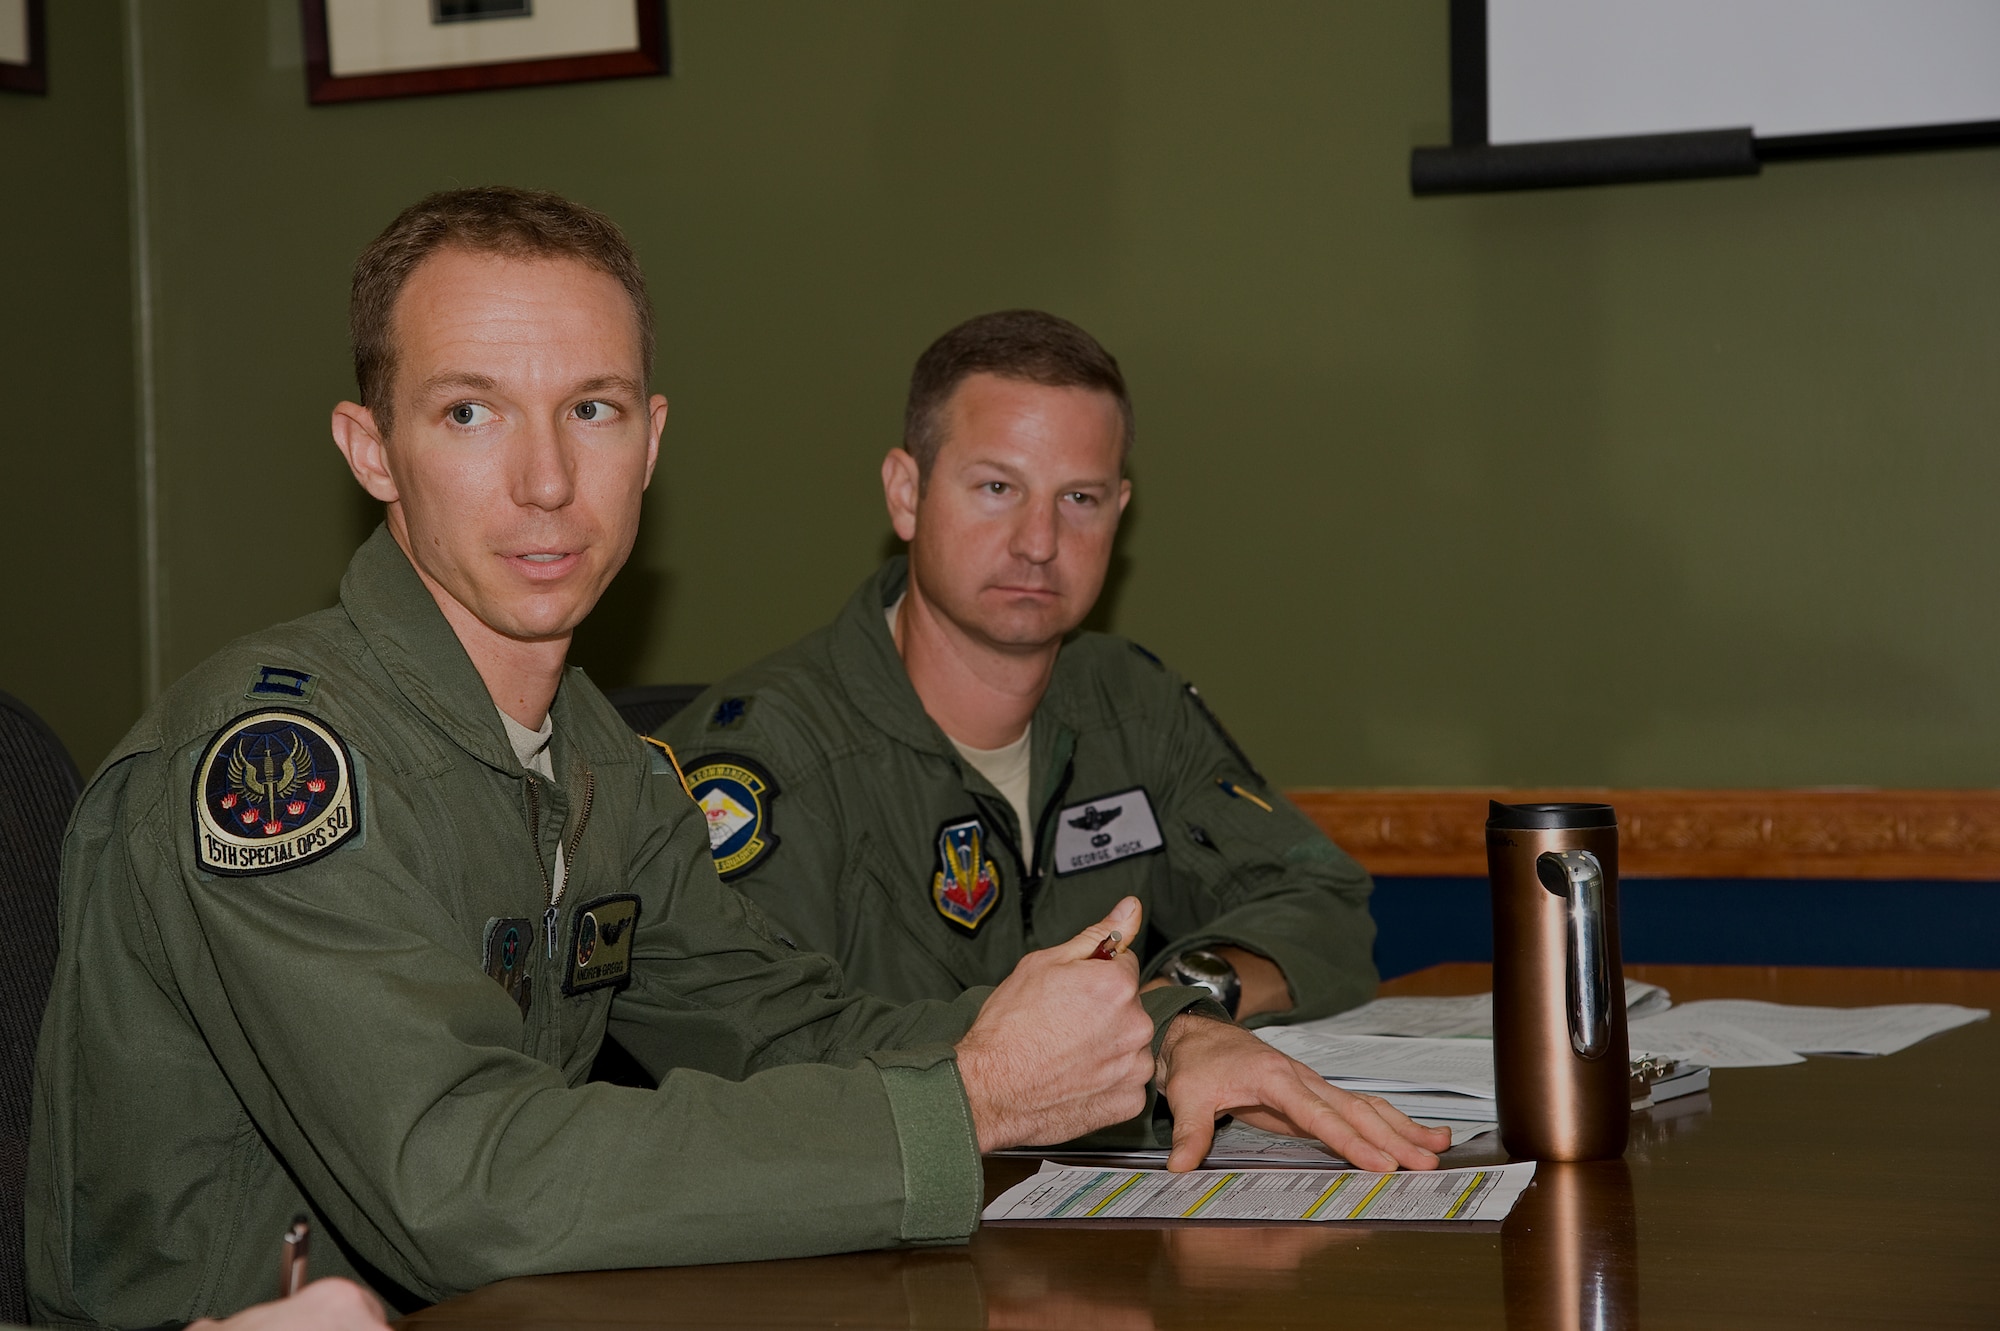 (From left) U.S. Air Force Capt. Andrew Gregg, a MC-130H pilot of 15th Special Operations Squadron, and Lt. Col. George Hock, director of operations of 14th Weapons Squadron, sit in on a brief for instructors and their students on a training flight at Hurlburt Field, Fla., Oct. 11, 2012. The 14th WPS produces well-trained experts who return to their respective units after graduation to raise the collective skill set of the community. (U.S. Air Force Photo/Airman 1st Class Michelle Vickers)